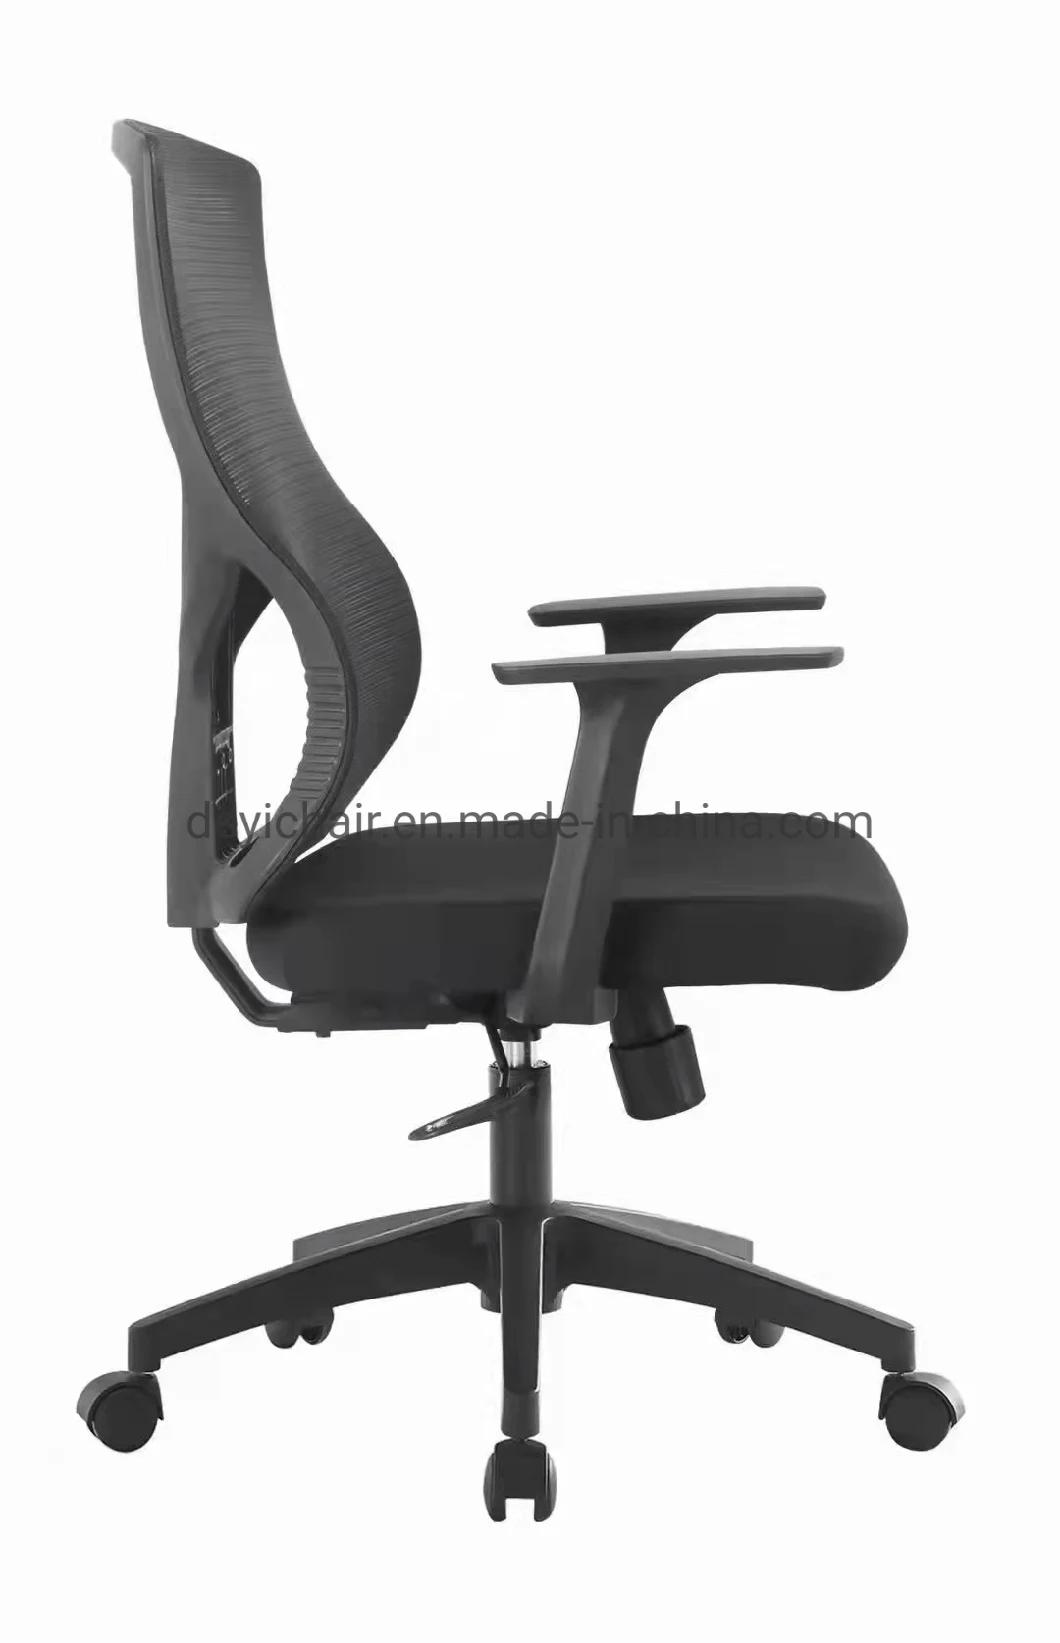 Nylon Base Nylon Castor Class 3 Gas Lift Mesh Upholstery for Back with Fixed Height PP Arms Staff Chair